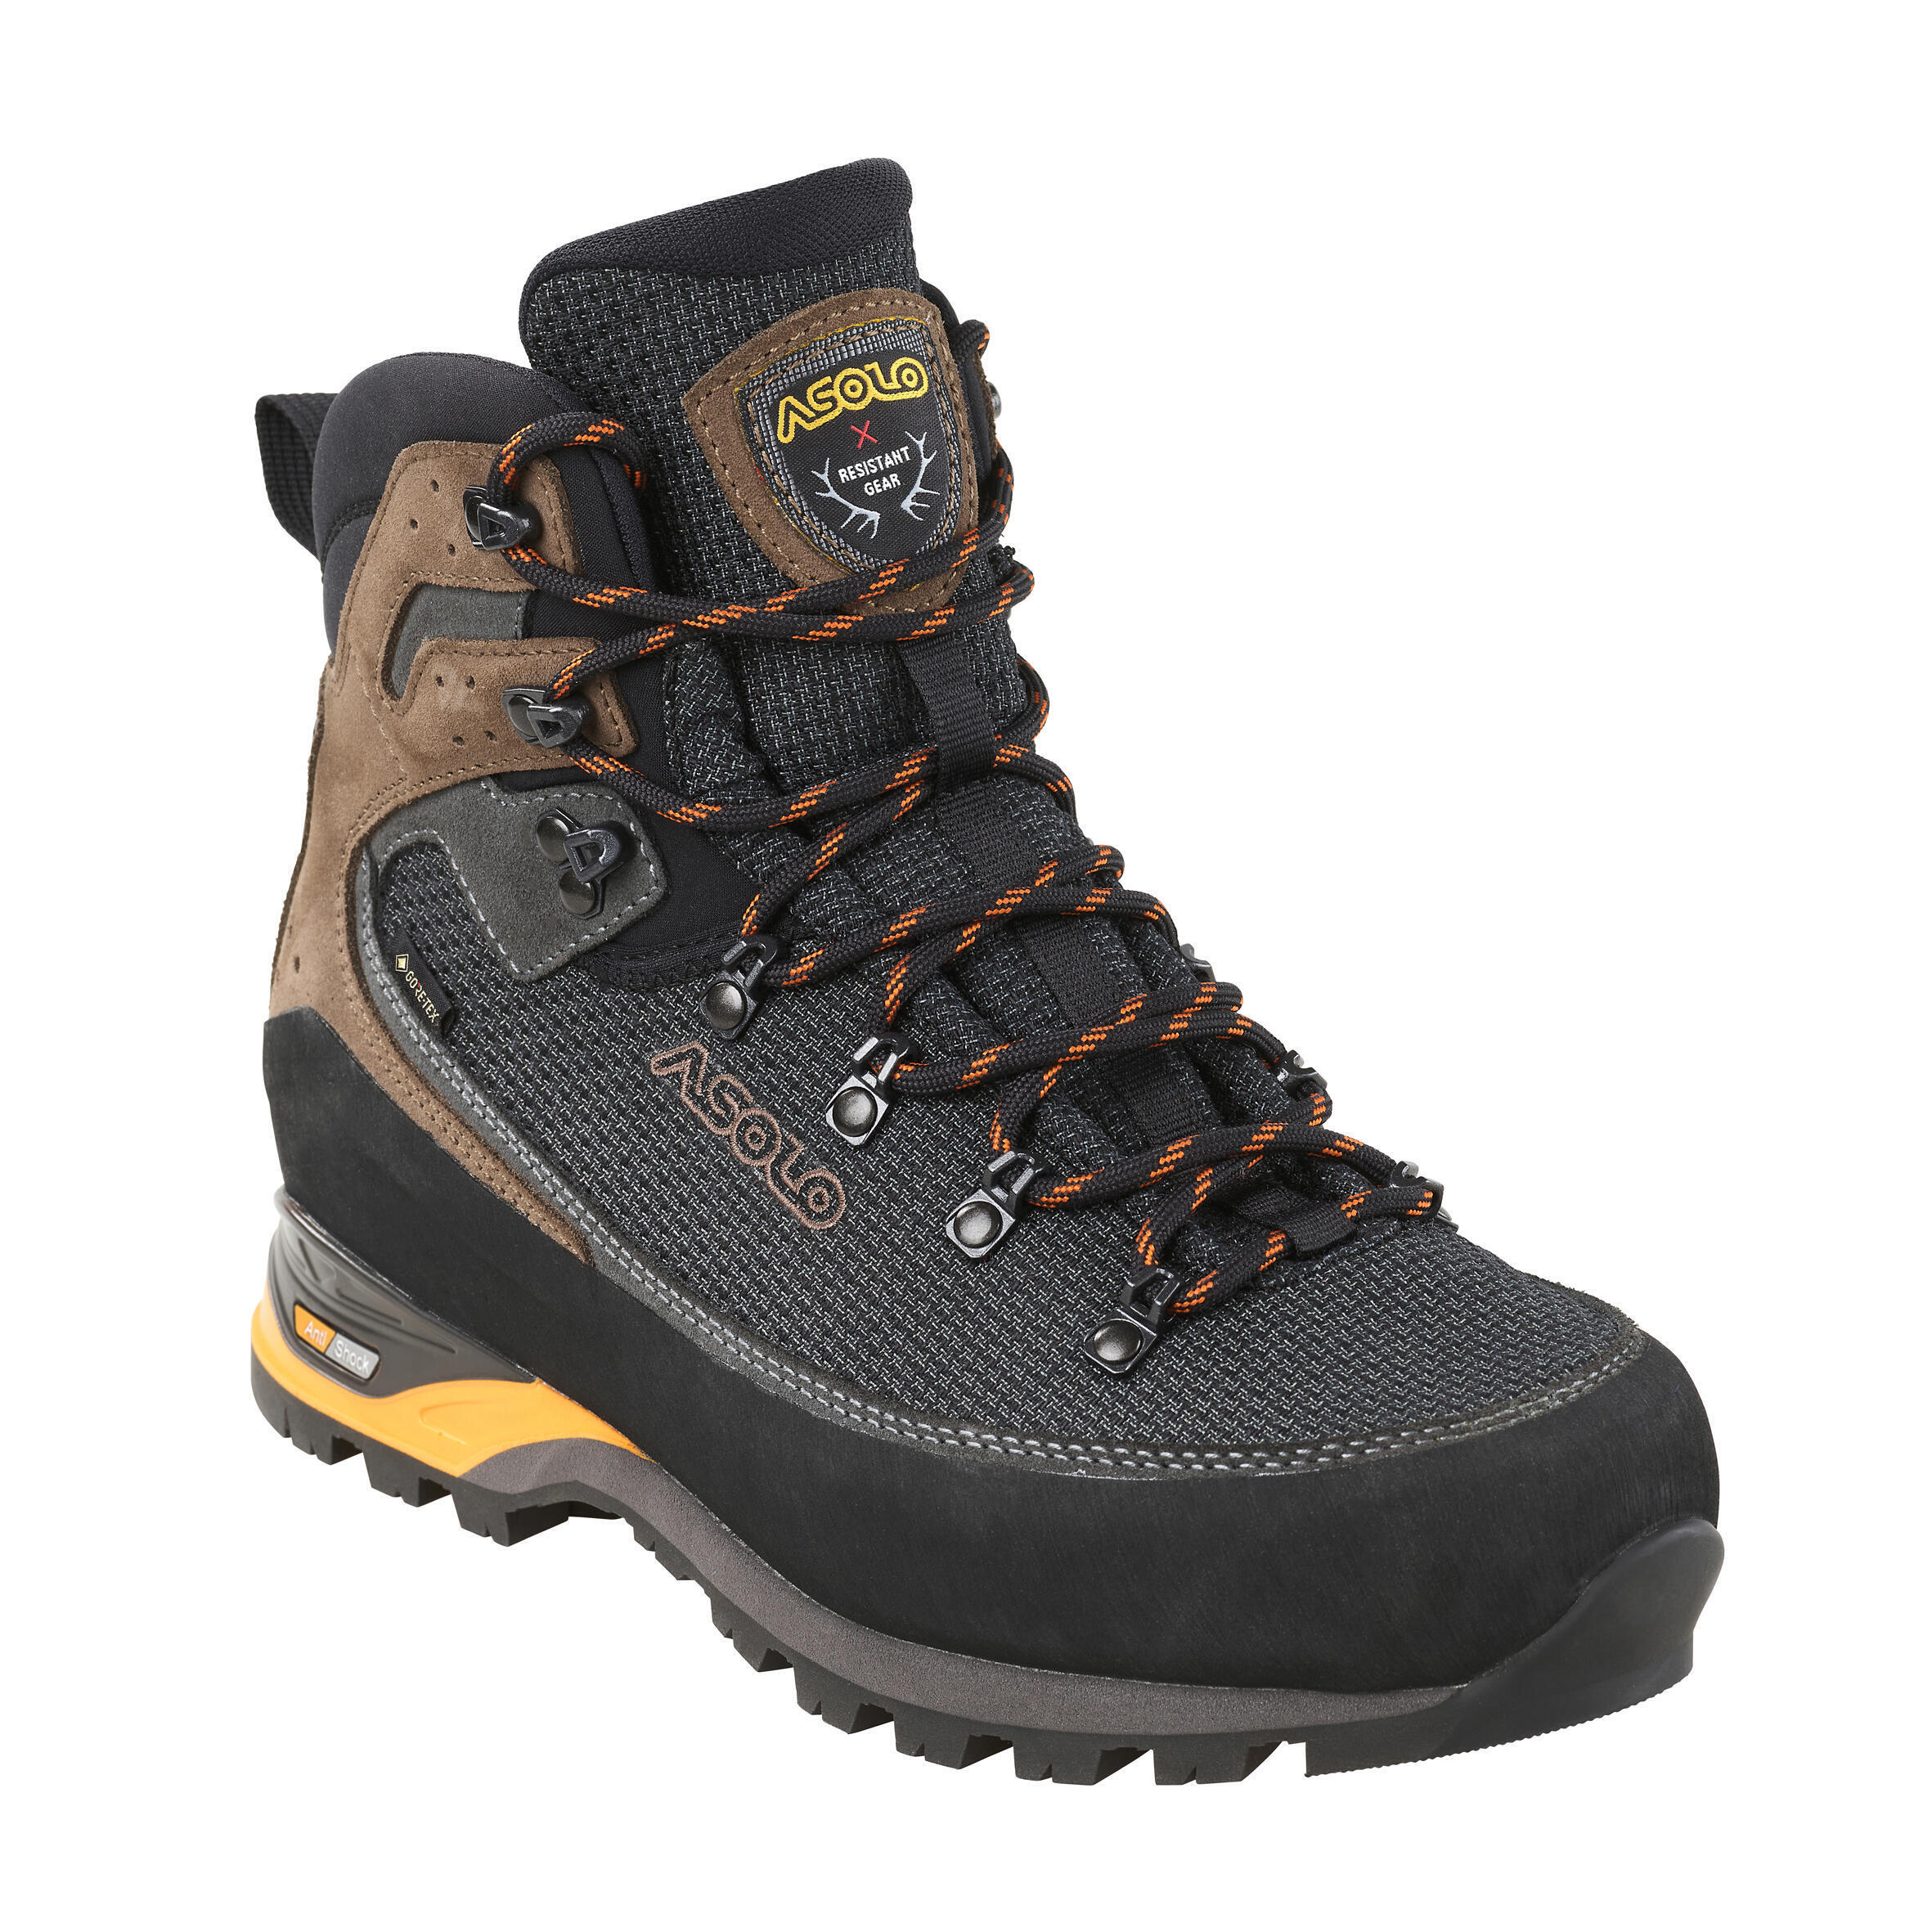 ASOLO REFURBISHED HUNTING WATERPROOF RESISTANT BOOTS - A GRADE